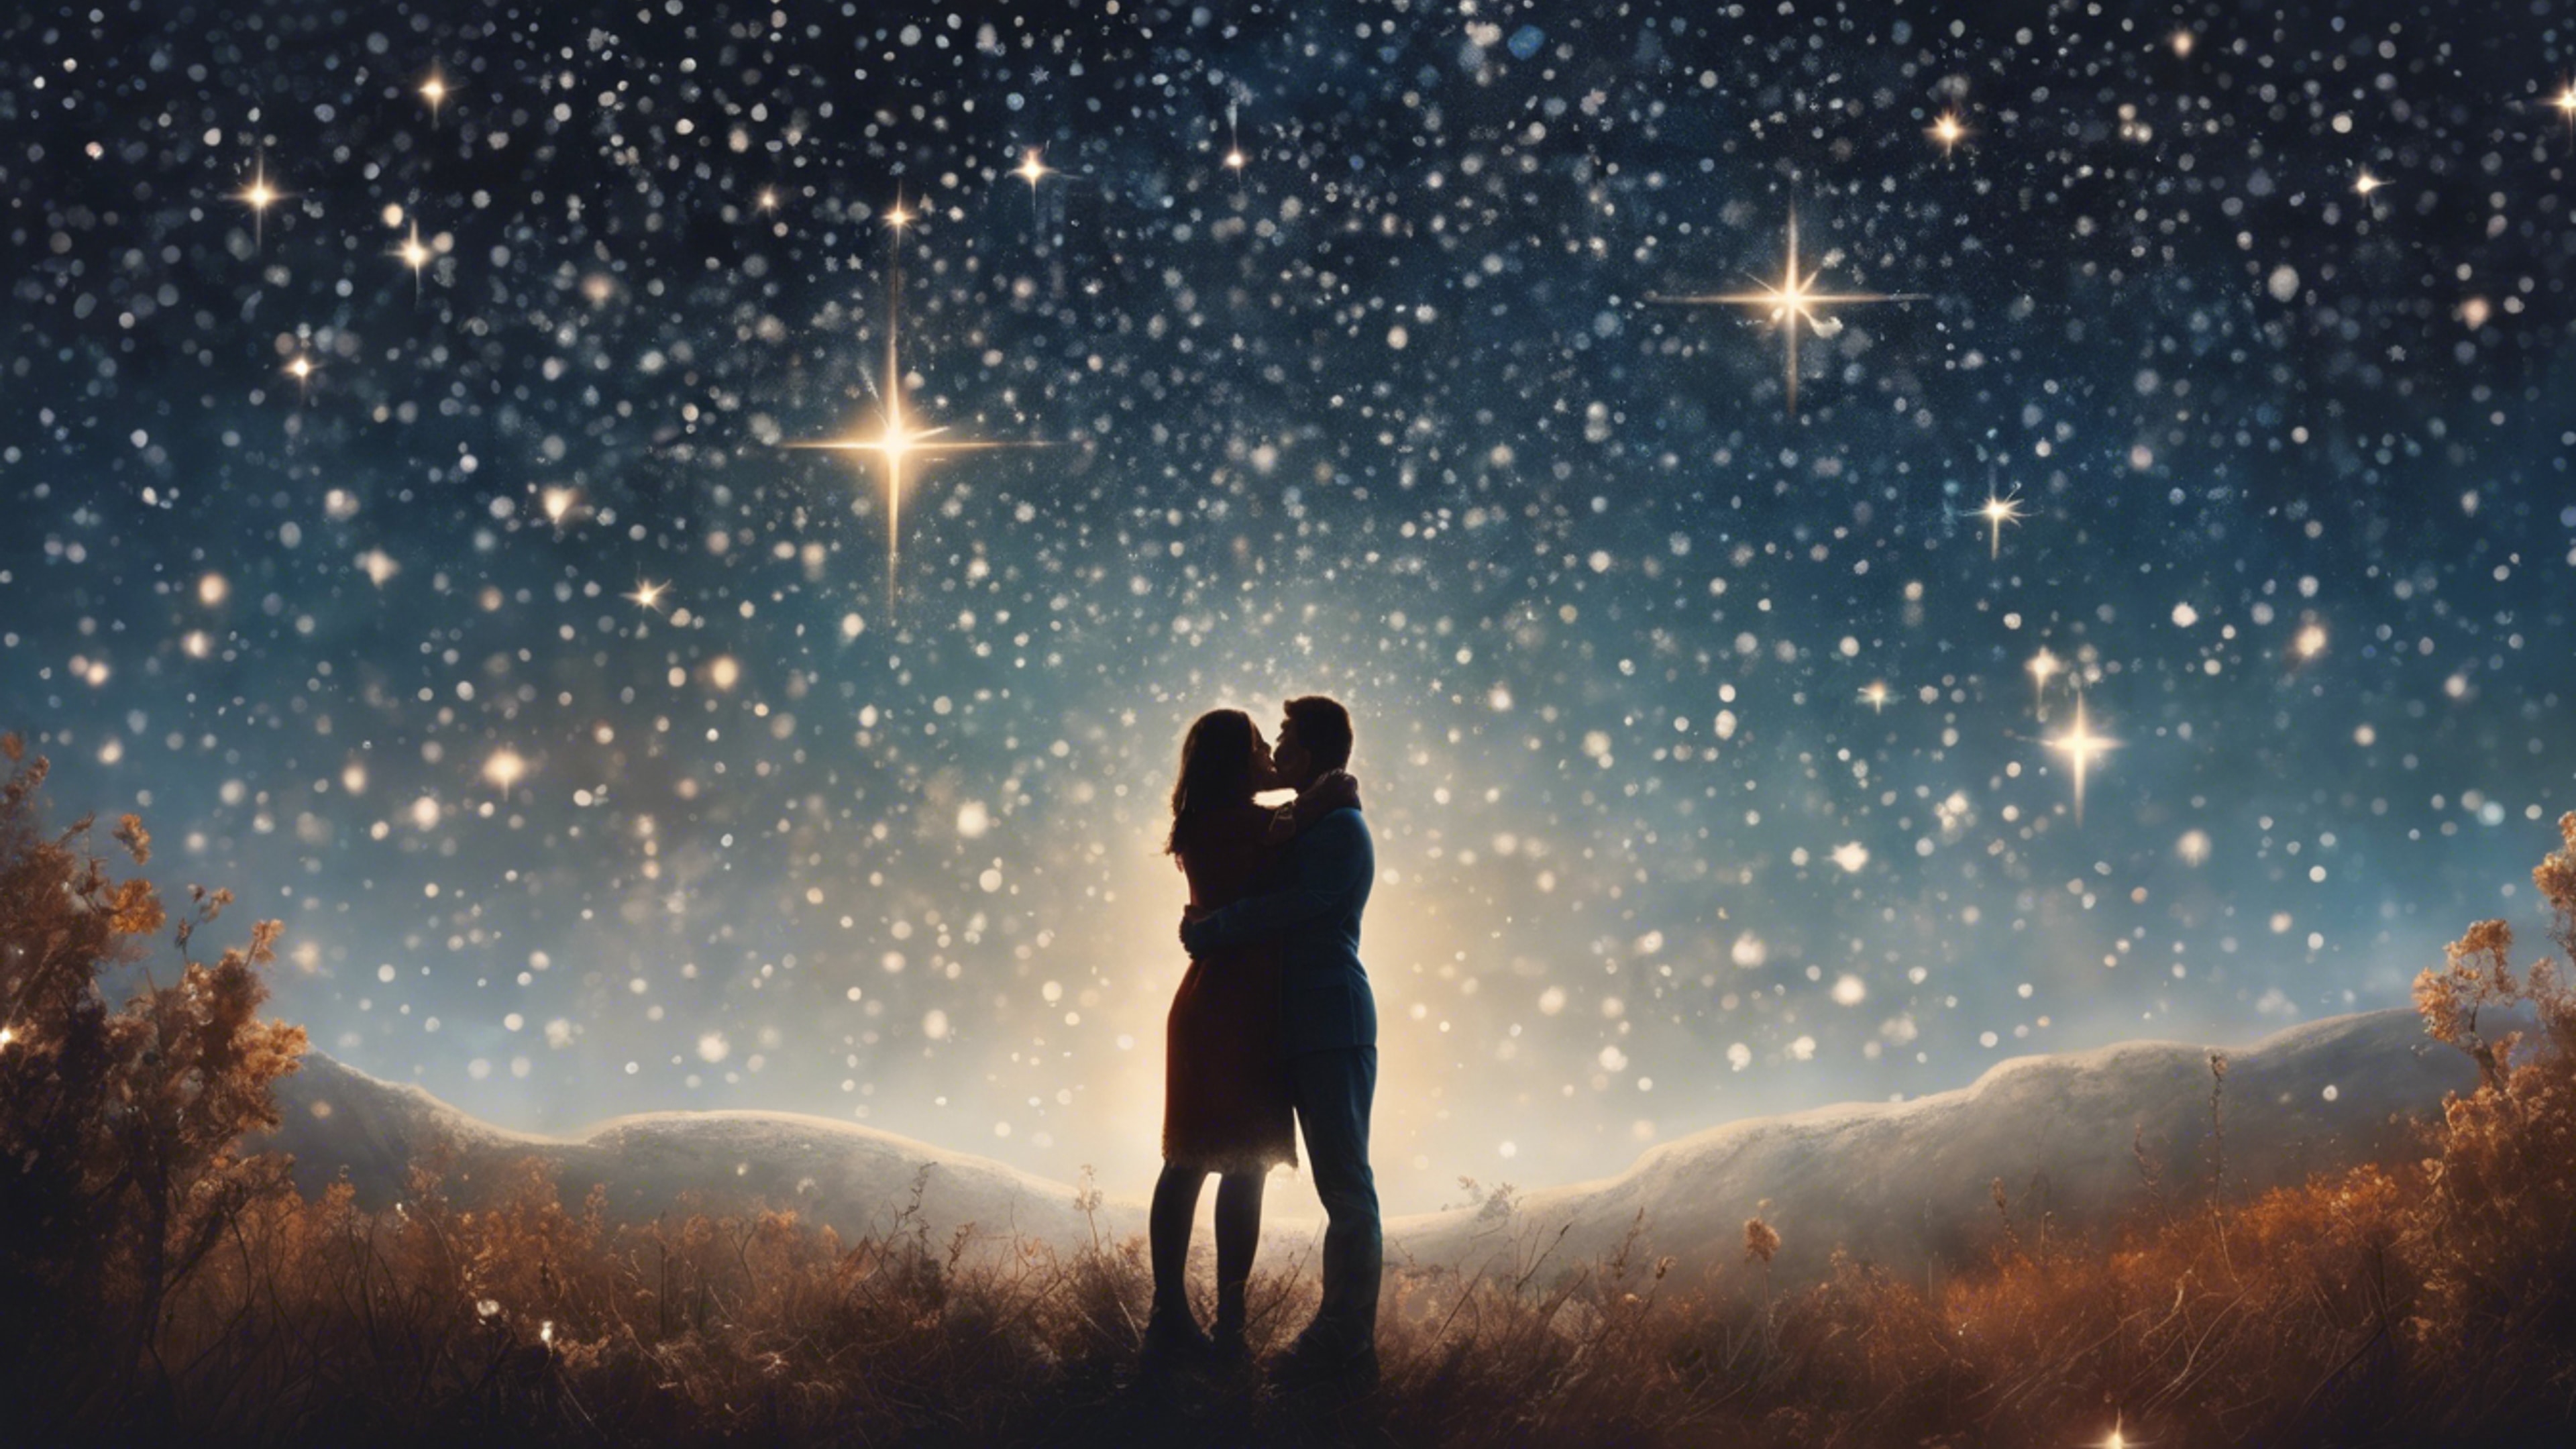 A timeless painting of a couple sharing a romantic moment under a star-filled sky. Hình nền[26fb6f637c3e4c759c8d]